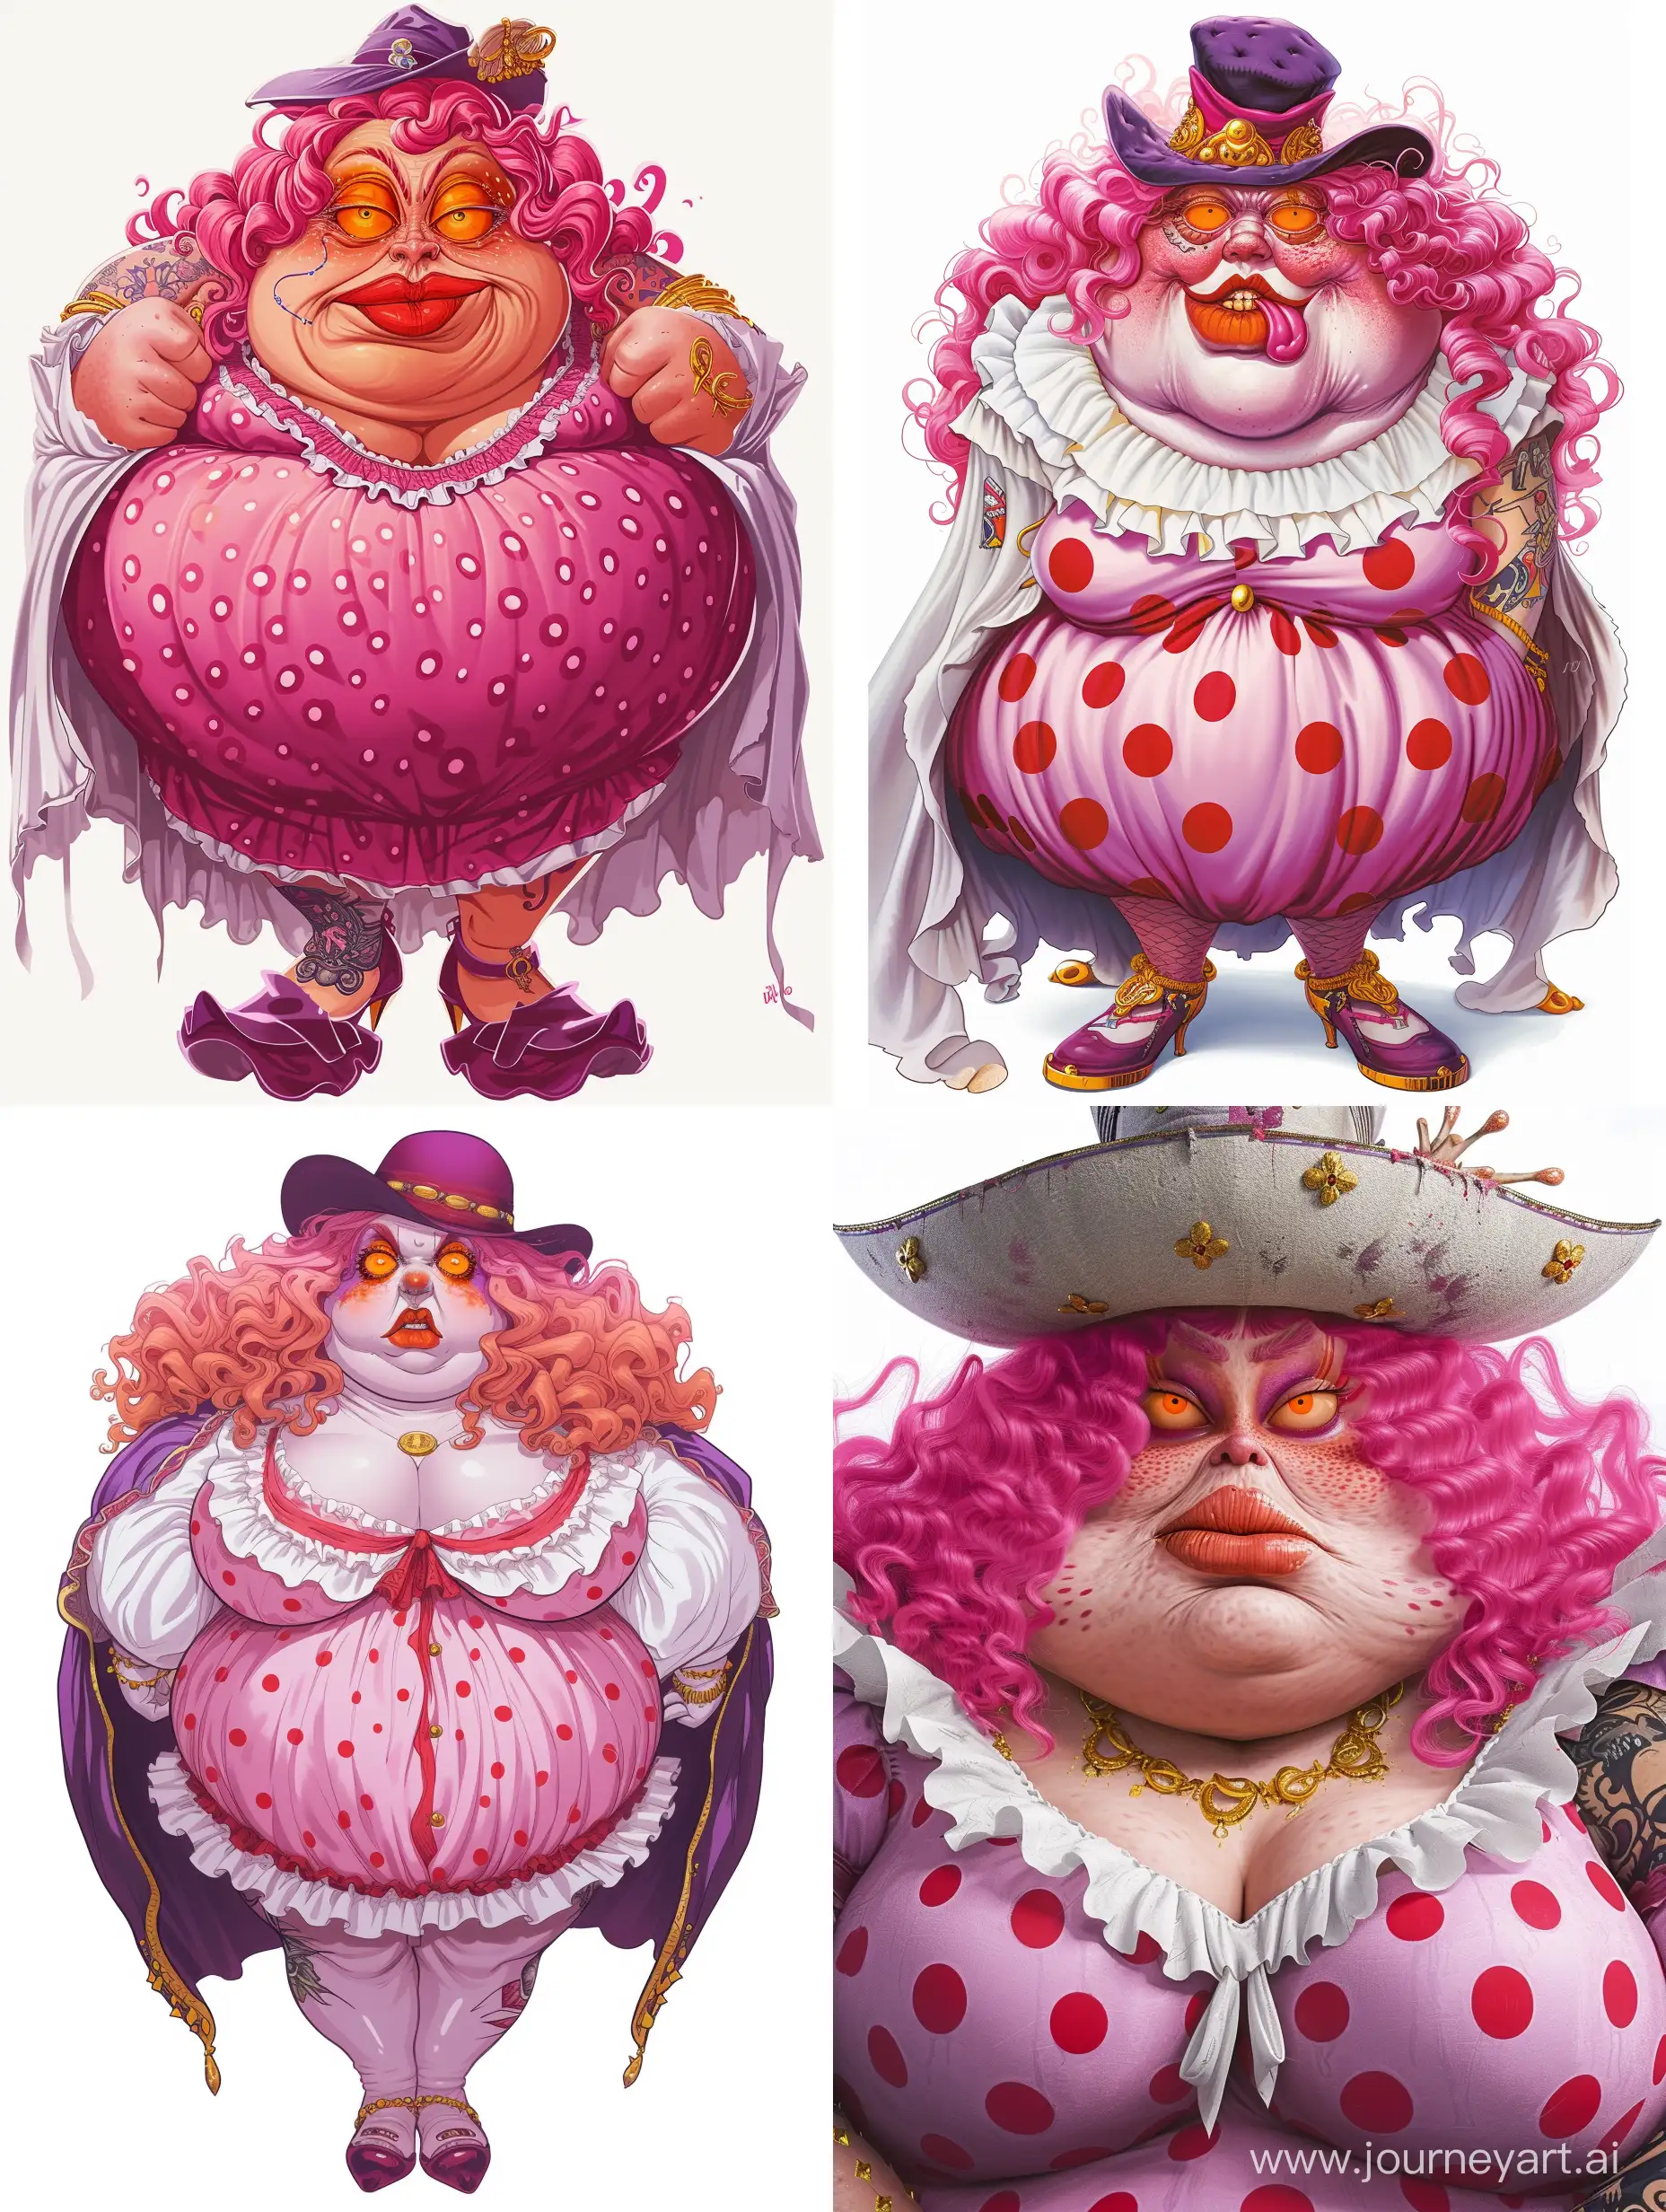 A round, plump woman with a chin that completely covers her neck. Big Mom is incredibly tall. Her eyes are quite round and orange in color, eyelashes are visible, dark purple shadows are visible around the eyes. a wide mouth with full lips, which she paints in bright pink or red, and a long thick tongue that often shows out of her mouth. Long, curly pink hair grows on her head, which falls down her back to the level of her shoulder blades. big and sloppy, nose and plump, round cheeks. She has a tattoo on her left arm and shoulder, wears a hat on her head, wears a pink dress with red polka dots and white ruffles along the neckline and hemline.Behind her is a cloak that falls almost to the ground on her broad back in white waves. The outfit is complemented by shoes with small heels of dark purple color and gold rings in large numbers, which are decorated with yellow stones and which are on almost all of her fingers.
